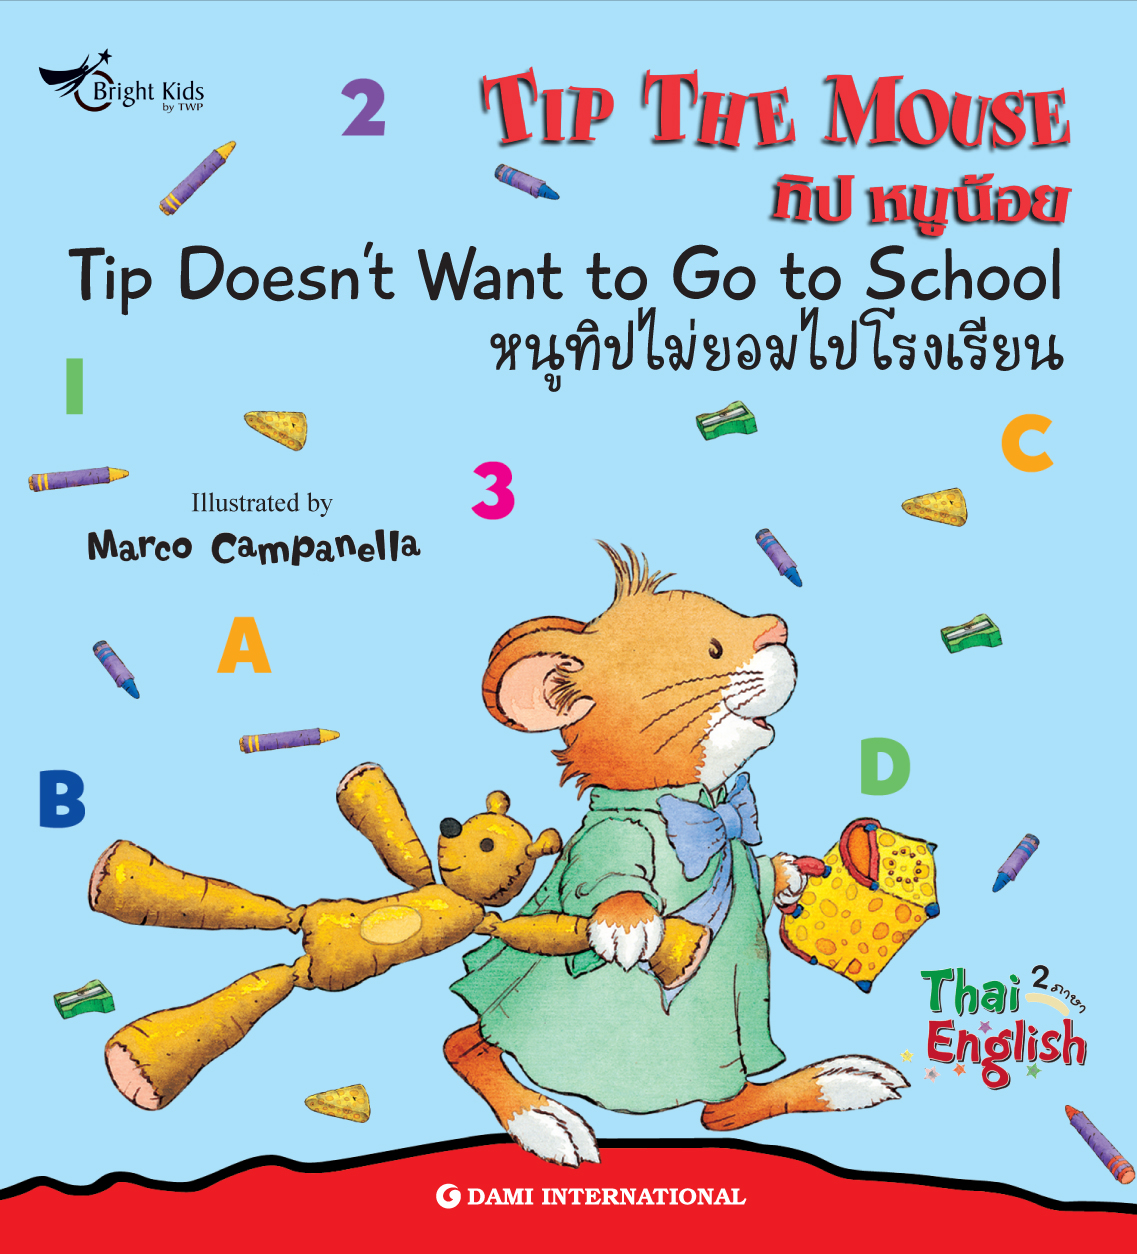 Tip the Mouse : Tip Doesn't Want to go to school